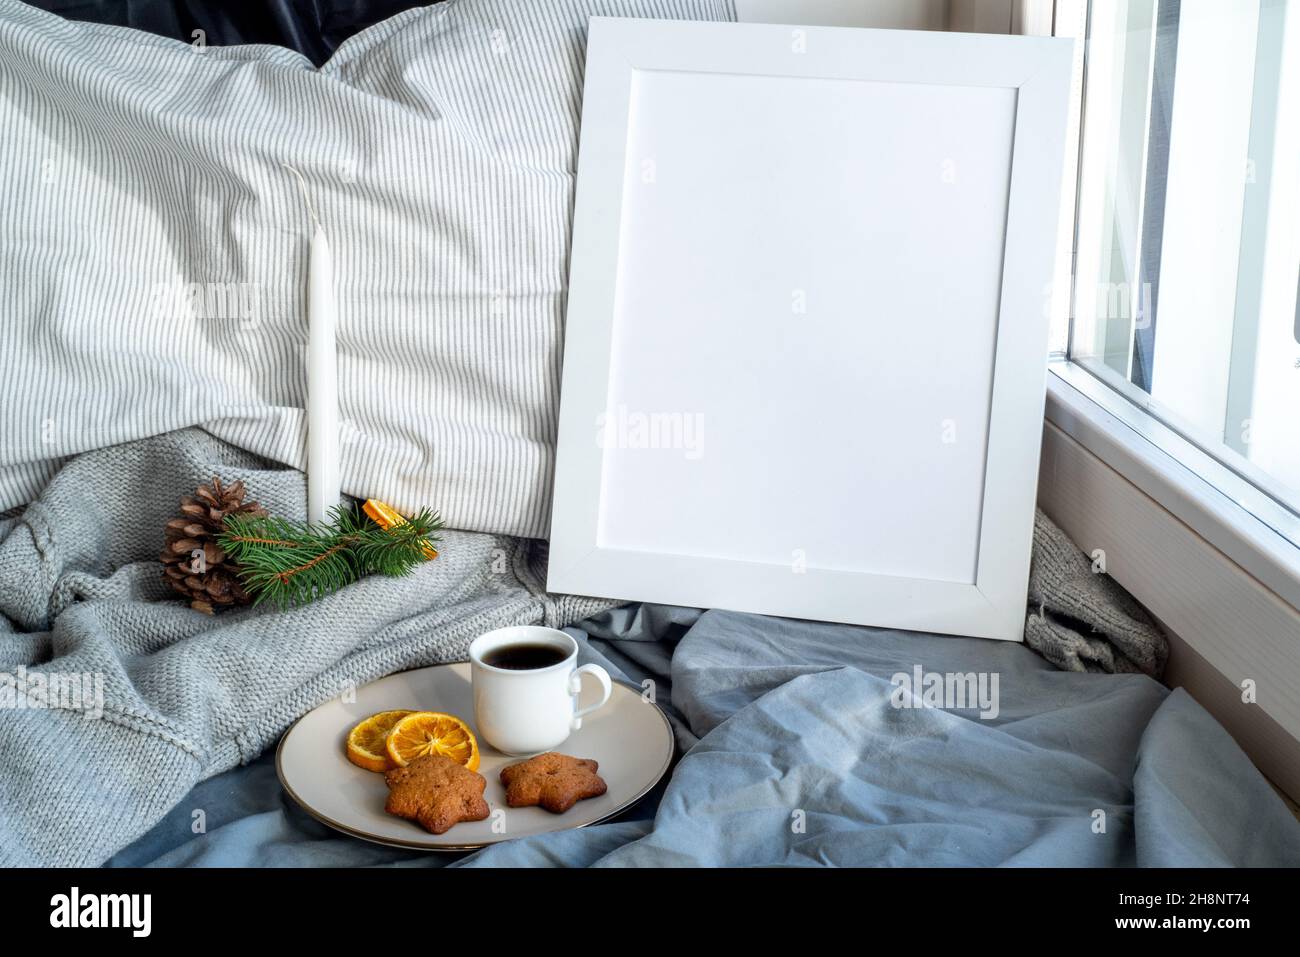 Cozy Christmas breakfast still life scene near the window. Winter interior. Blank white picture frame mockup.Cup of coffee with wholemeal cookies, pil Stock Photo